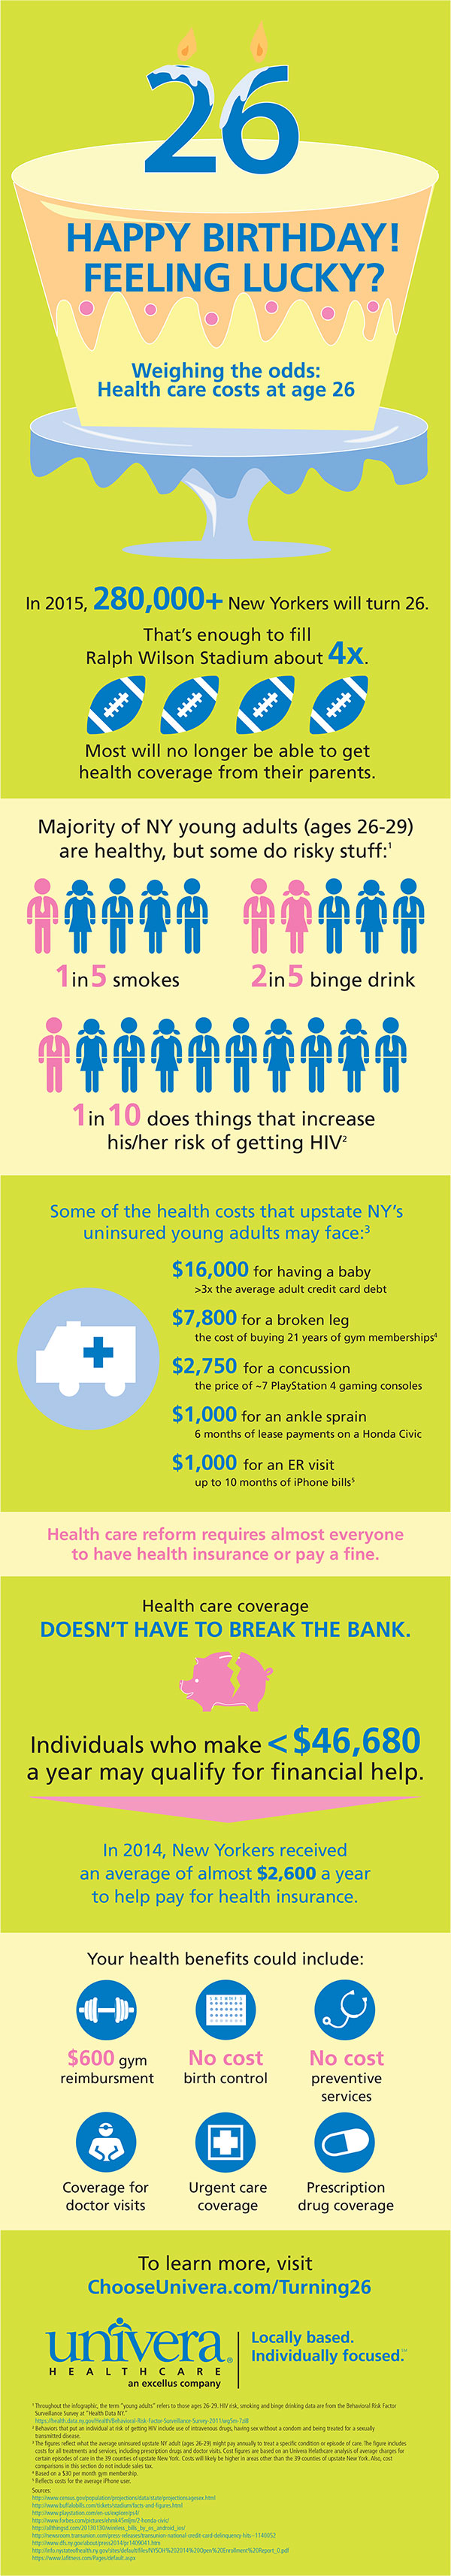 If you break a leg, you could face more than $7,000 in medical bills. Or, suffer a concussion, and you could face $3,000 in costs. Uninsured young adults in upstate New York face a variety of unexpected medical costs if they get sick or hurt.<br /><br />Go to <a href='http://www.chooseunivera.com/Turning26'>ChooseUnivera.com/Turning26</a> to learn more.